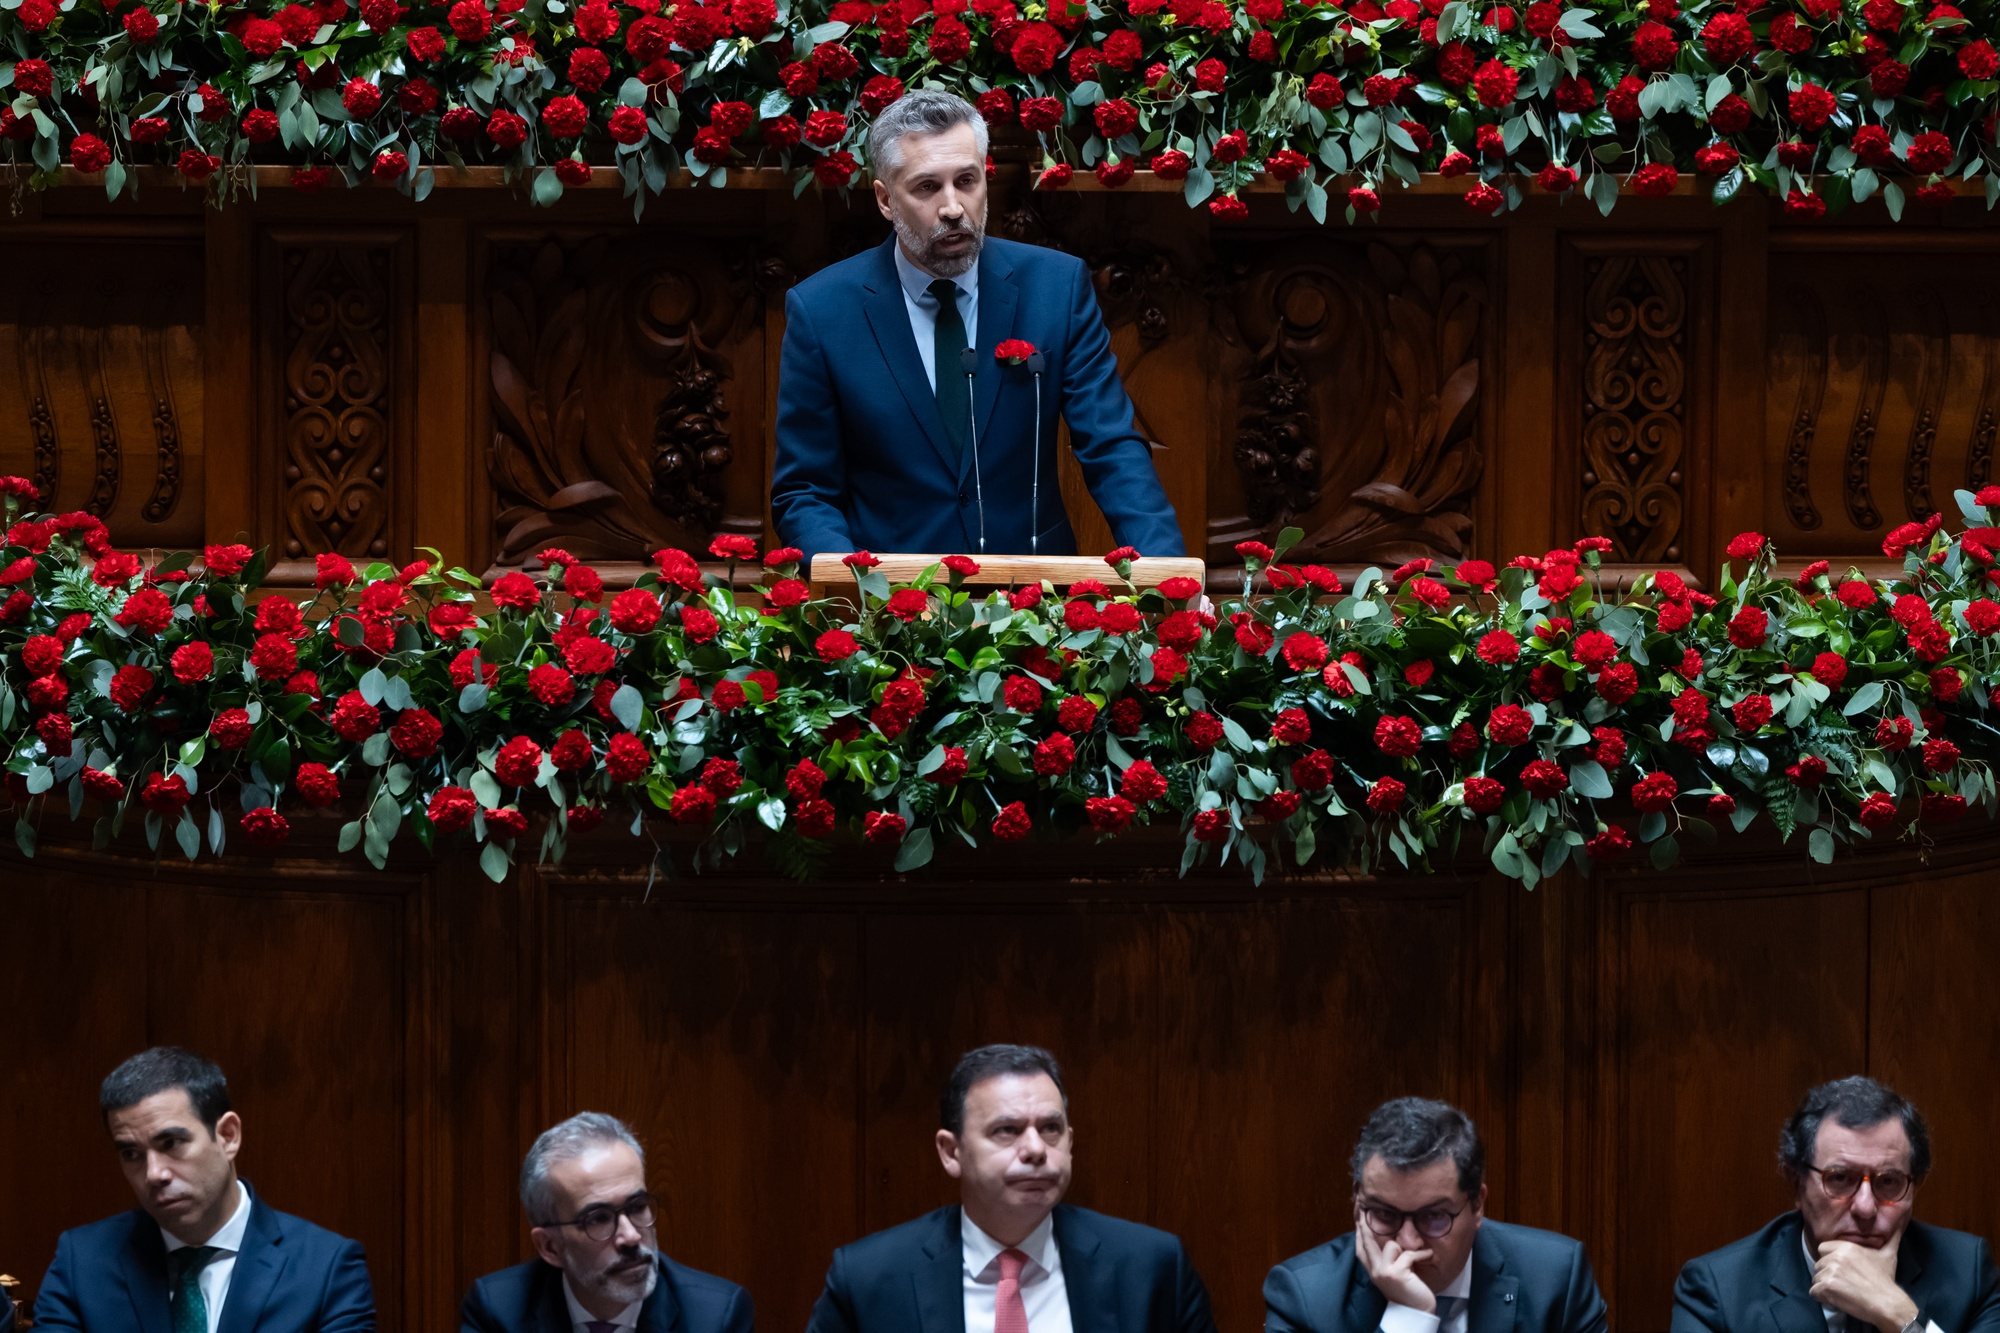 Portuguese Socialist Party (PS) leader, Pedro Nuno Santos, delivers a speech during the solemn comemorative session at the Portuguese parliament in Lisbon, Portugal, 25 April 2024. Portugal celebrates the 50th anniversary of the Carnation Revolution that ended the authoritarian regime of Estado Novo (New State) that ruled the country between 1926 to 1974. JOSE SENA GOULAO/LUSA